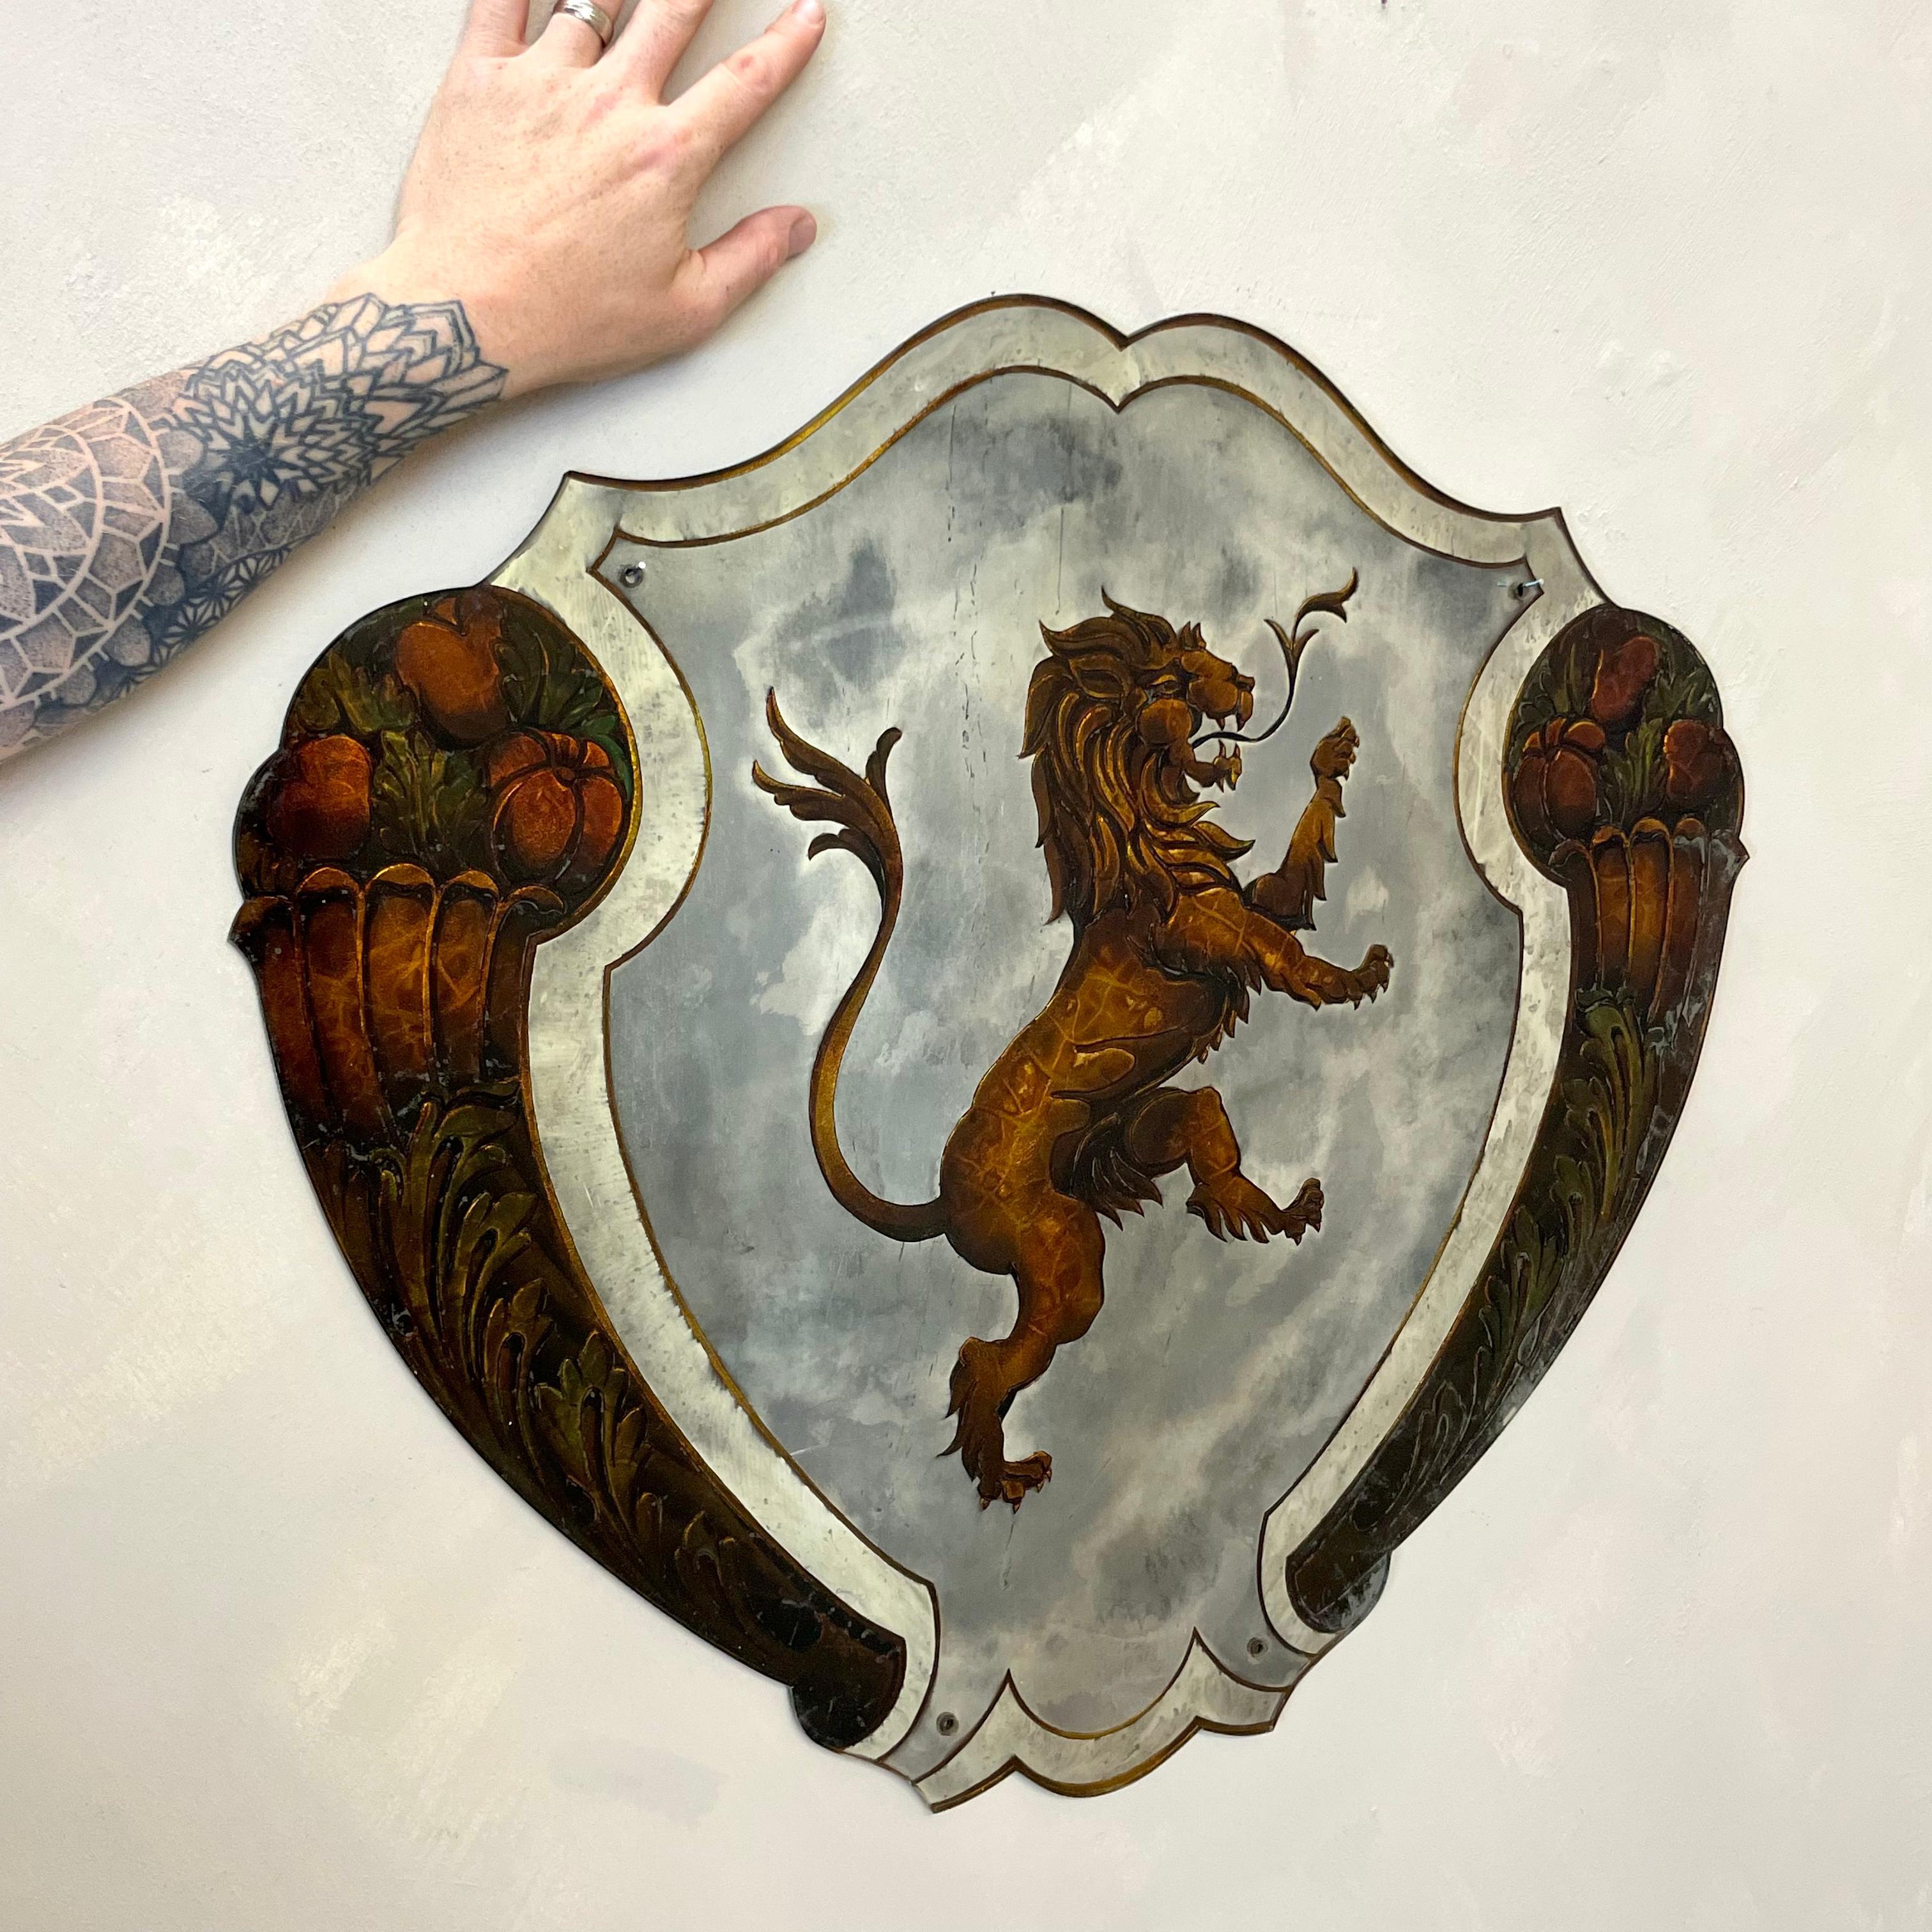 A rare French Verre Eglomisé mirror, depicting a Heraldic Lion with detailed copper and gilt foliate and floral design.
The mirror itself is naturally foxed and from either side looks very smoked. (Photos have not been edited so what it shows is how